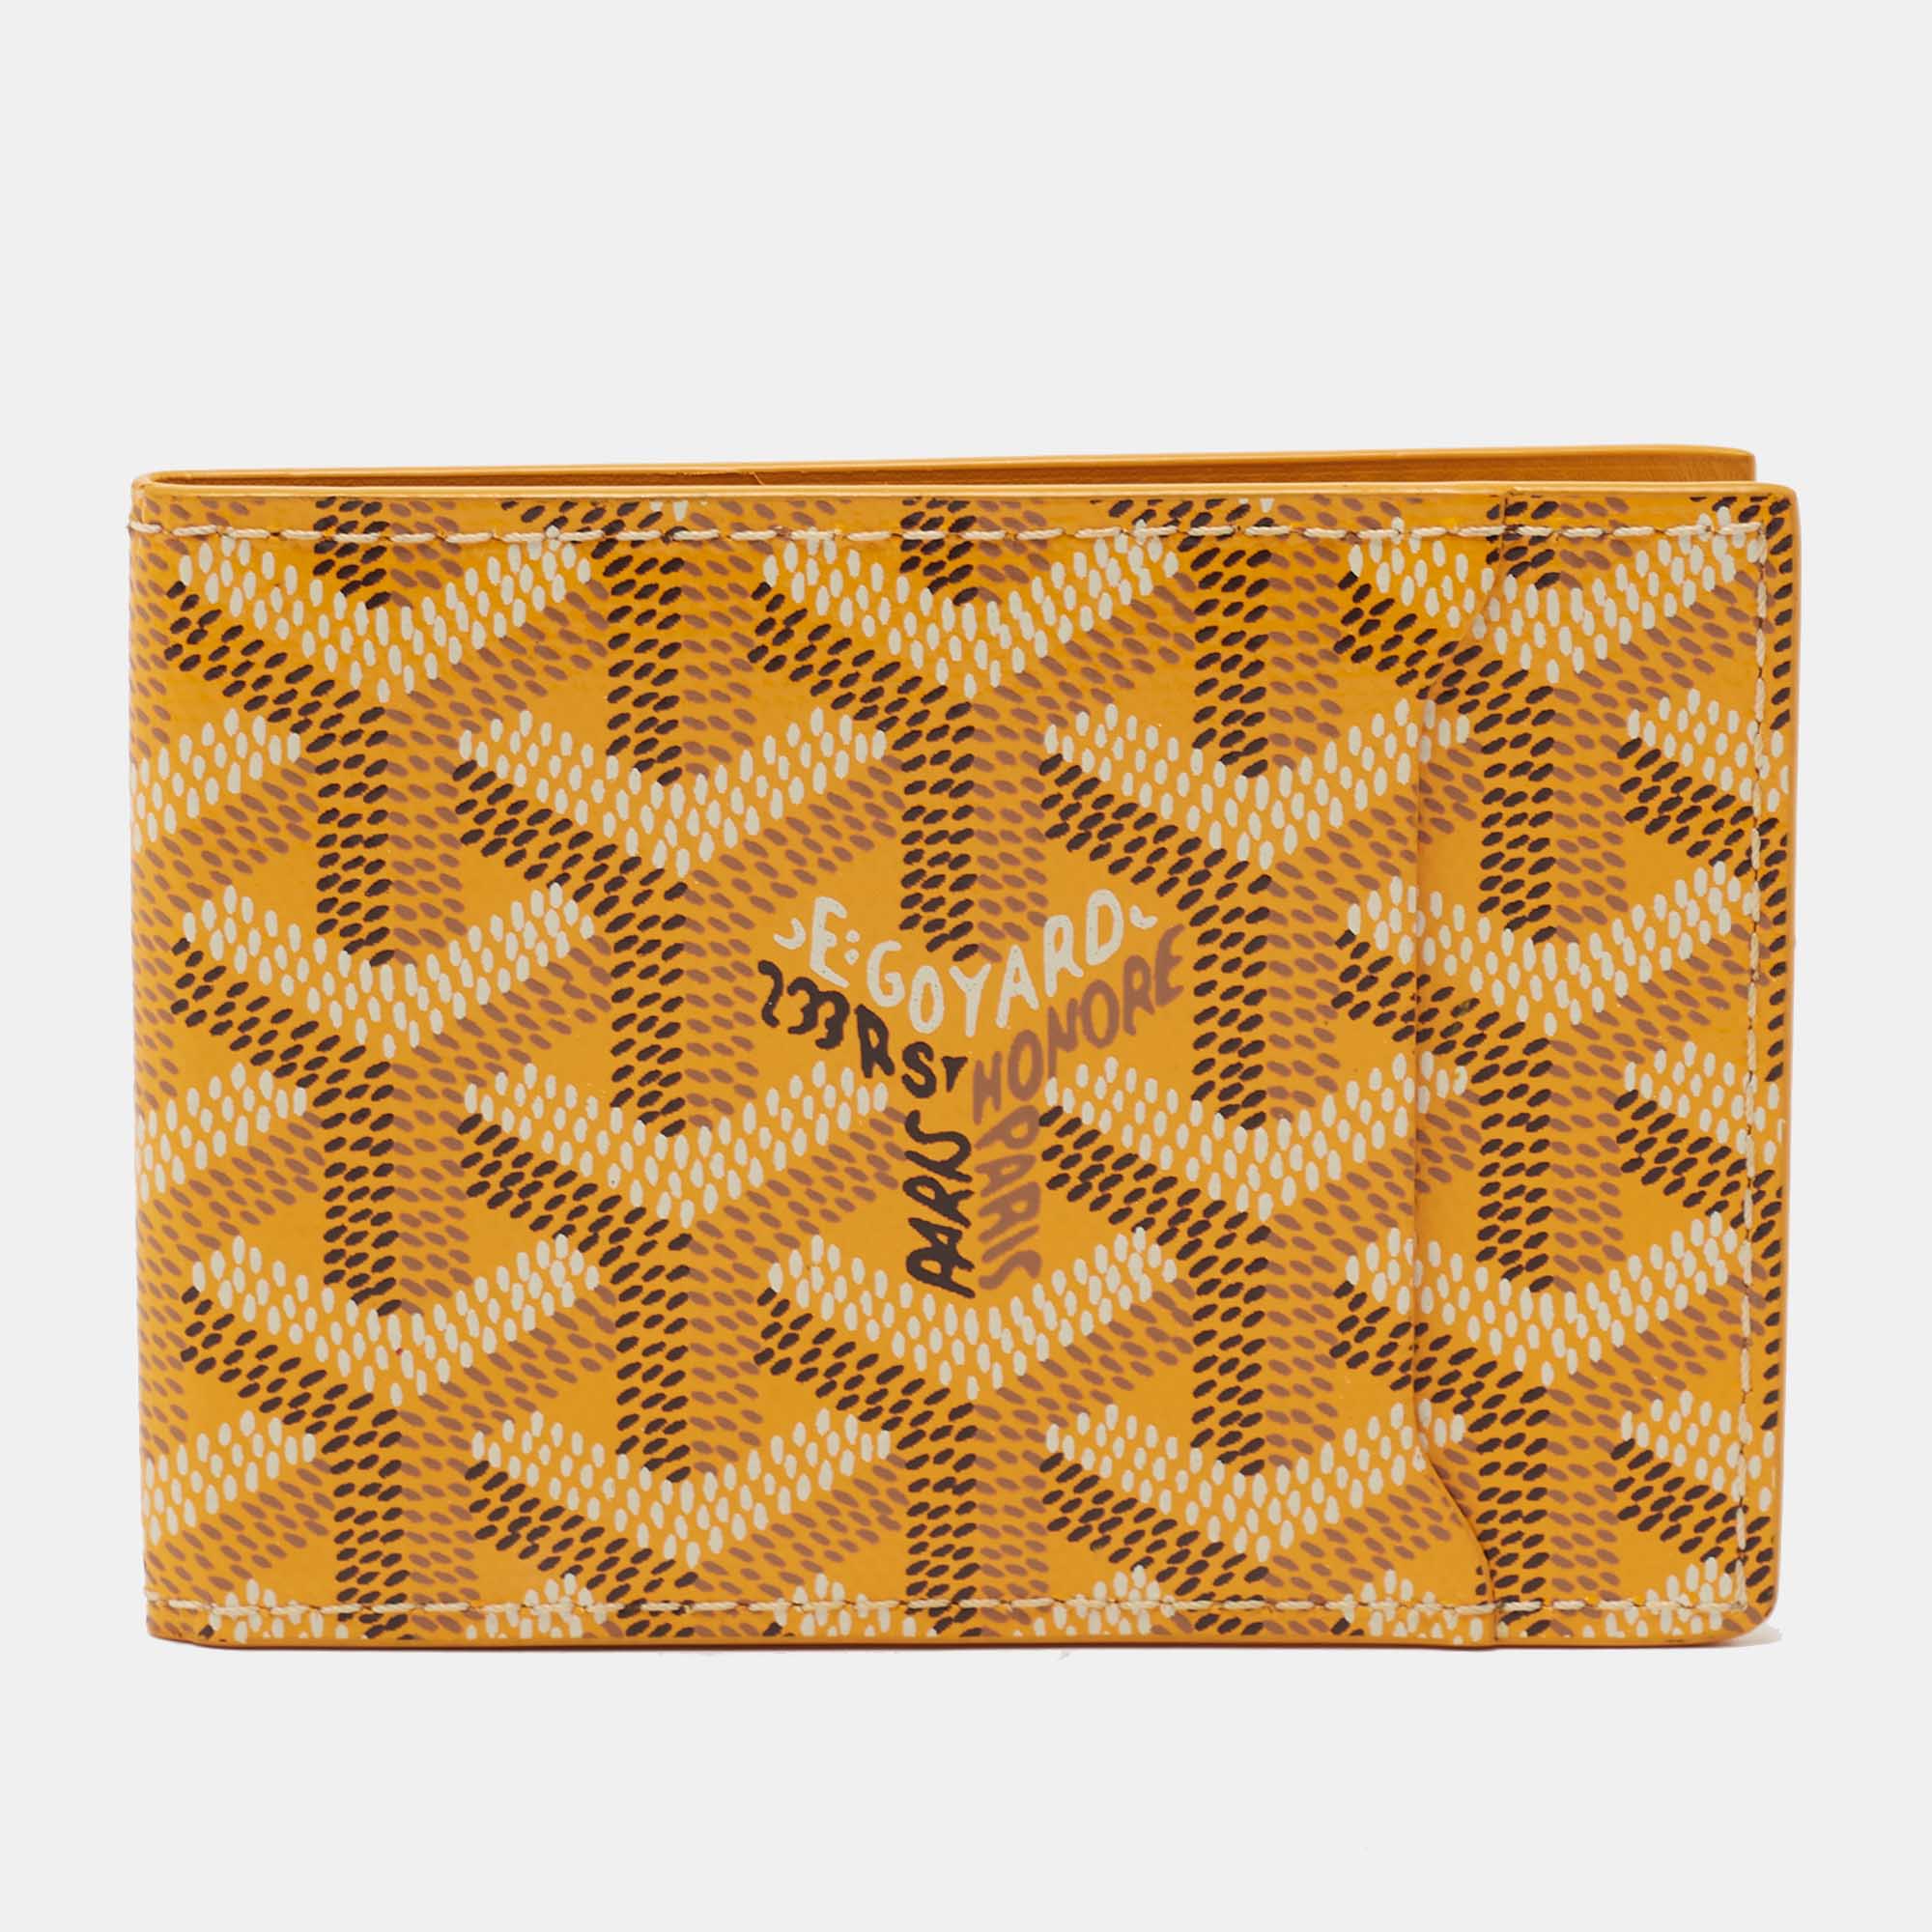 Does this Goyard cardholder look authentic or fake? : r/wallets